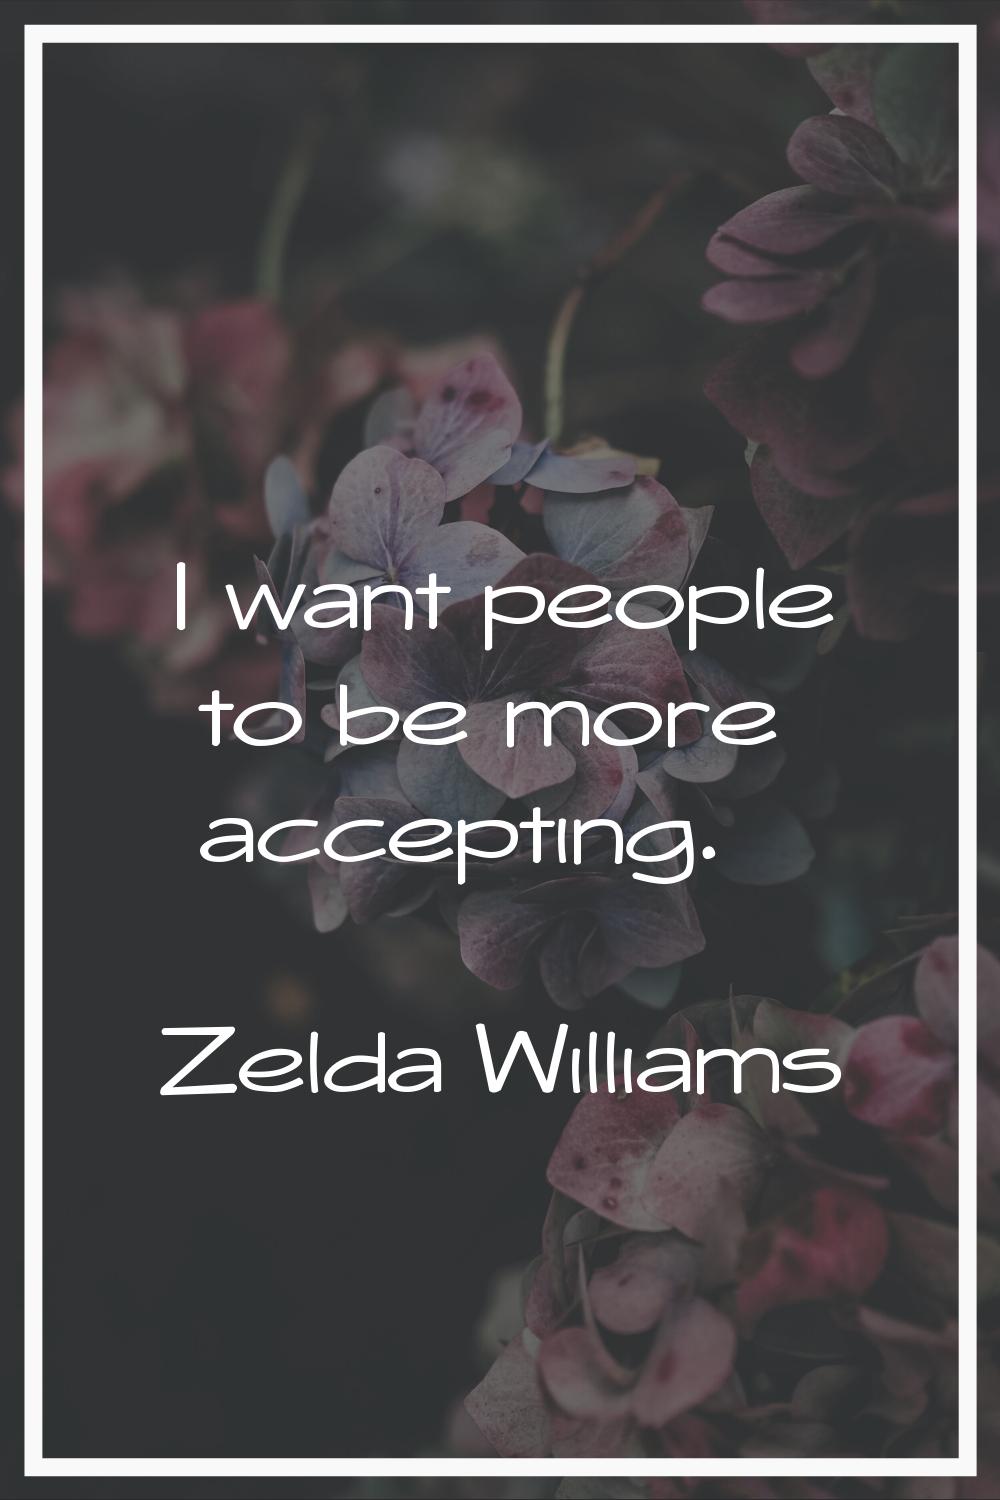 I want people to be more accepting.